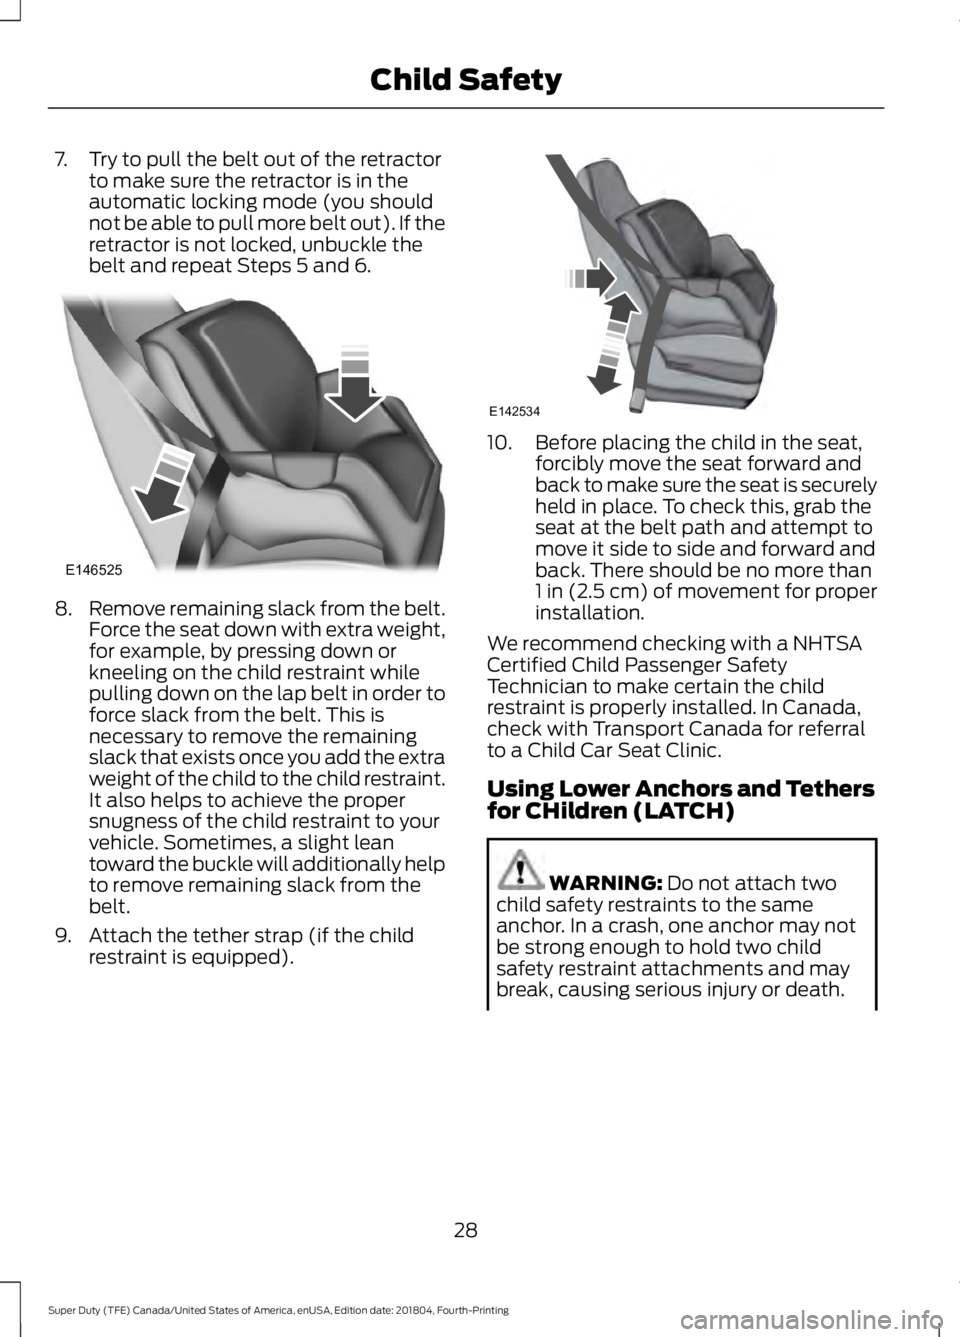 FORD F450 SUPER DUTY 2019  Owners Manual 7. Try to pull the belt out of the retractor
to make sure the retractor is in the
automatic locking mode (you should
not be able to pull more belt out). If the
retractor is not locked, unbuckle the
be